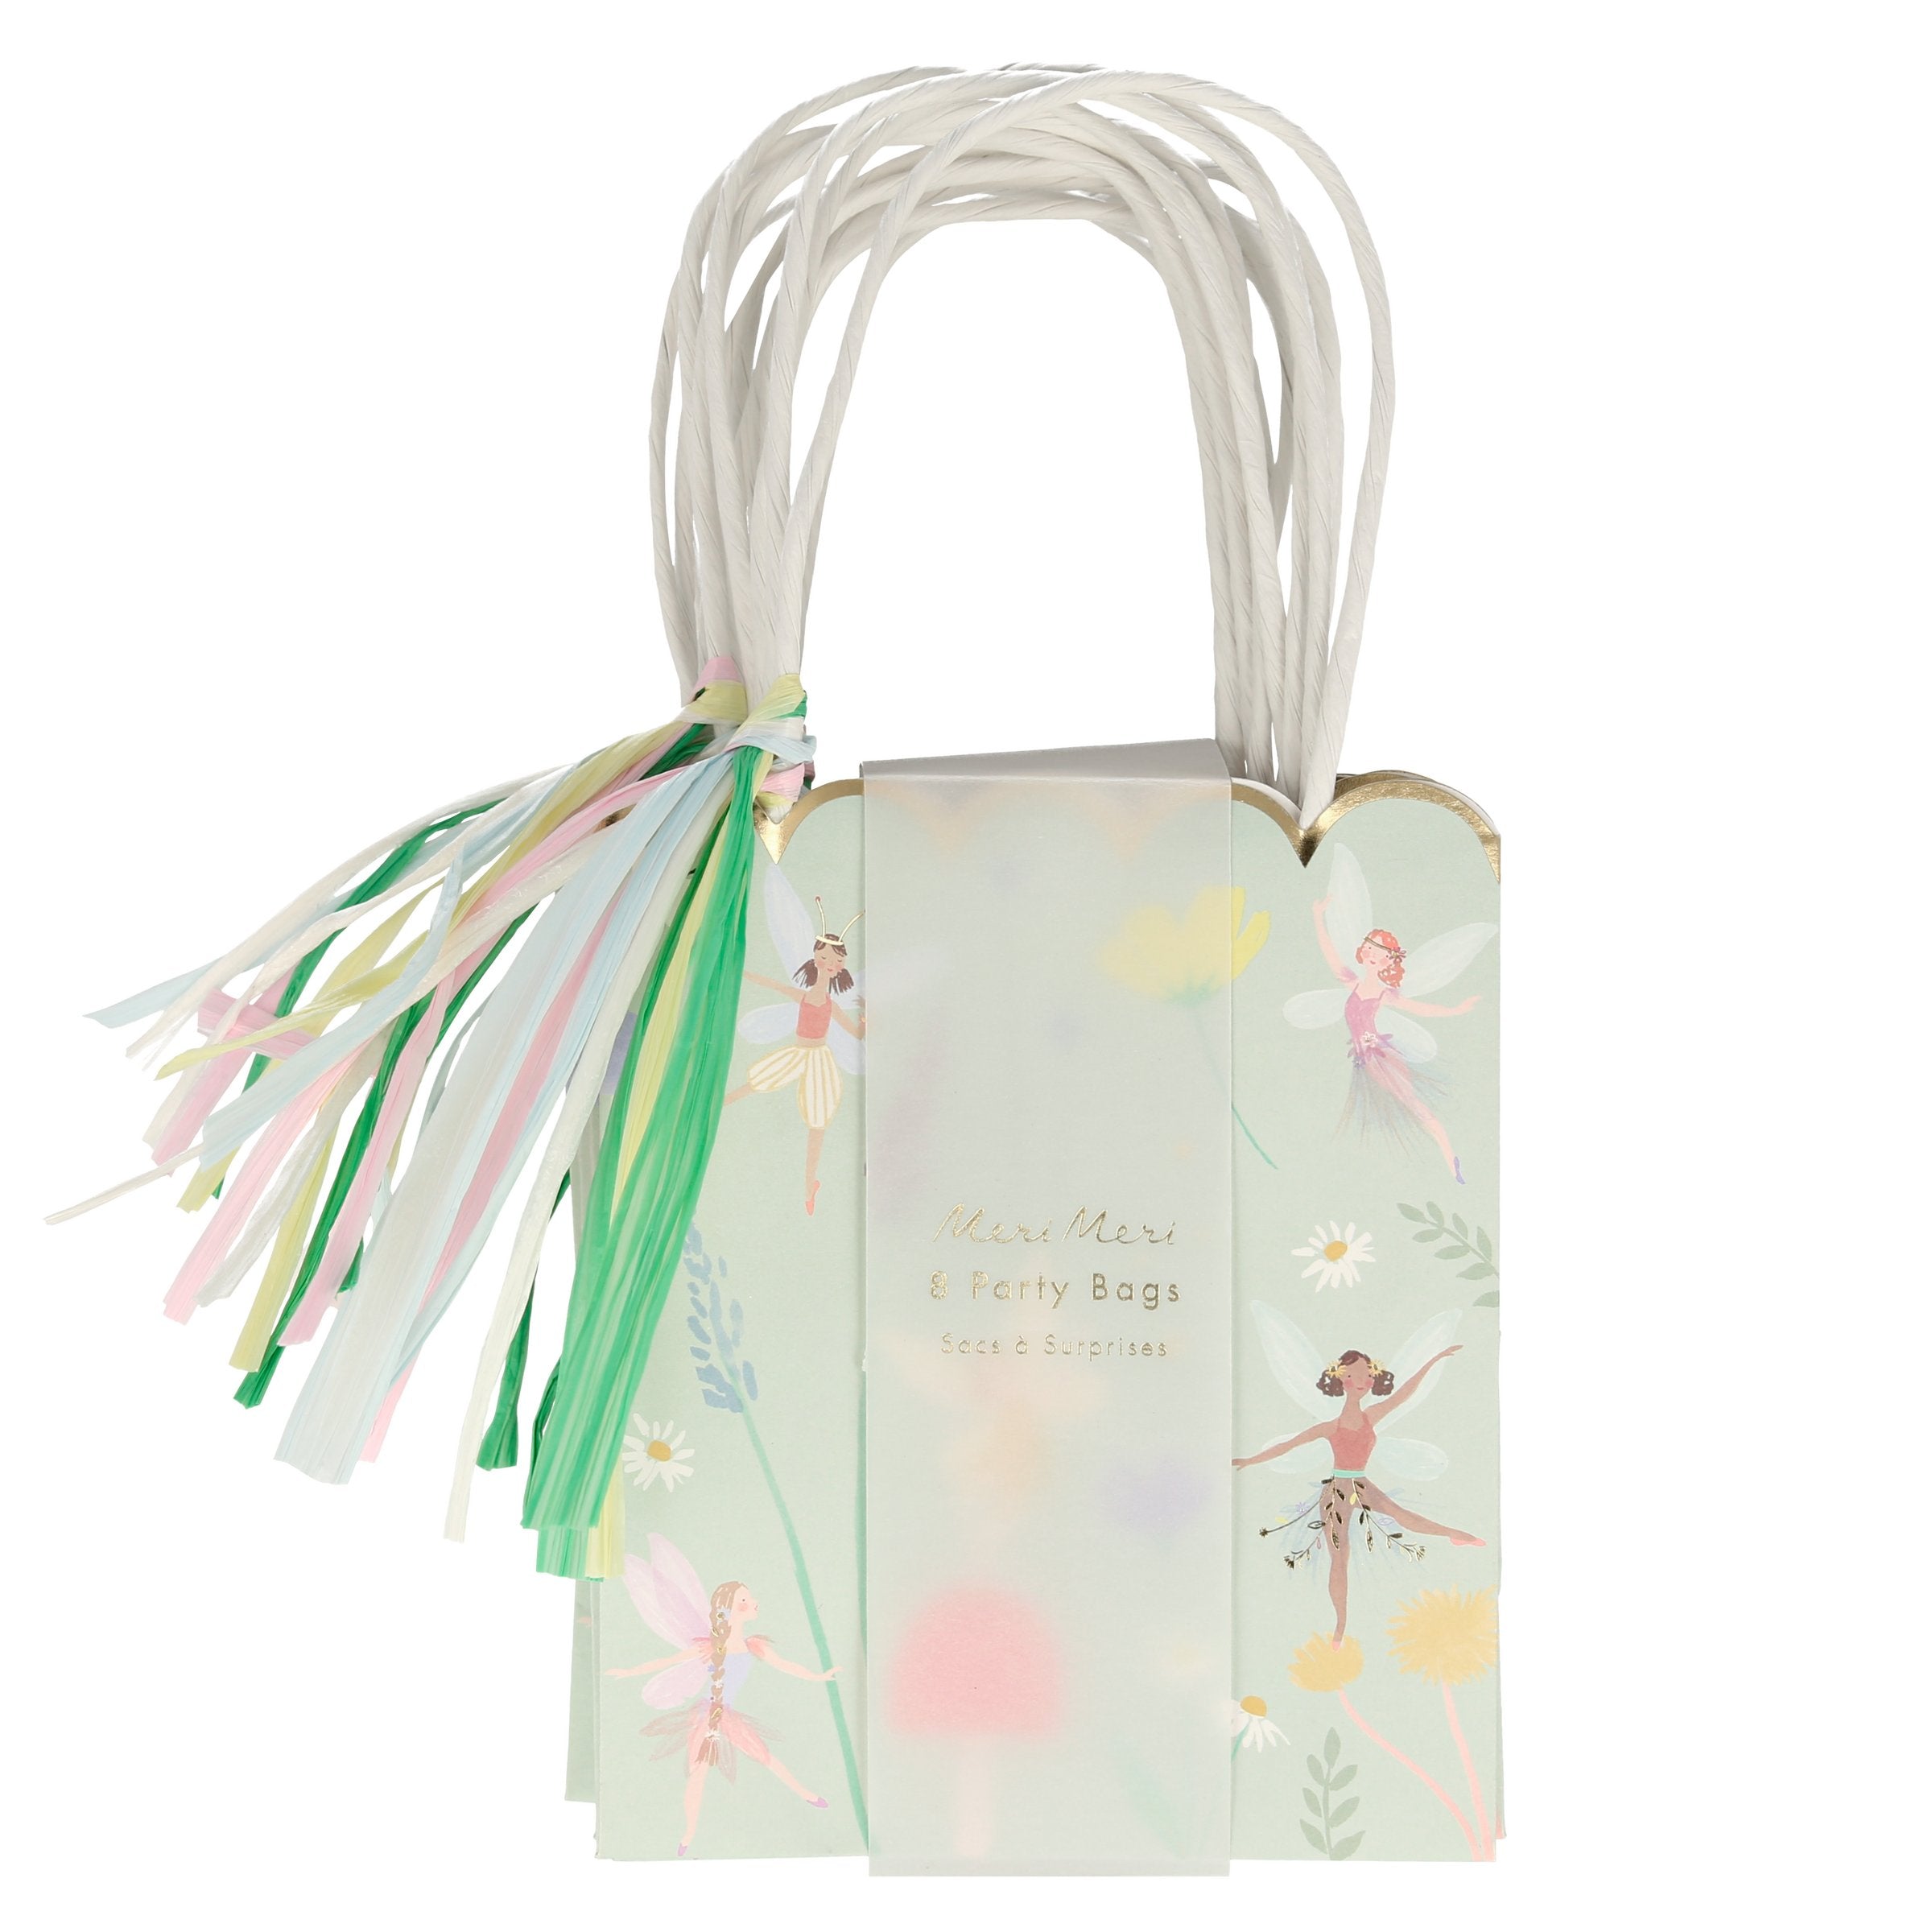 Our wonderful party bags are perfect for a fairy or princess party.